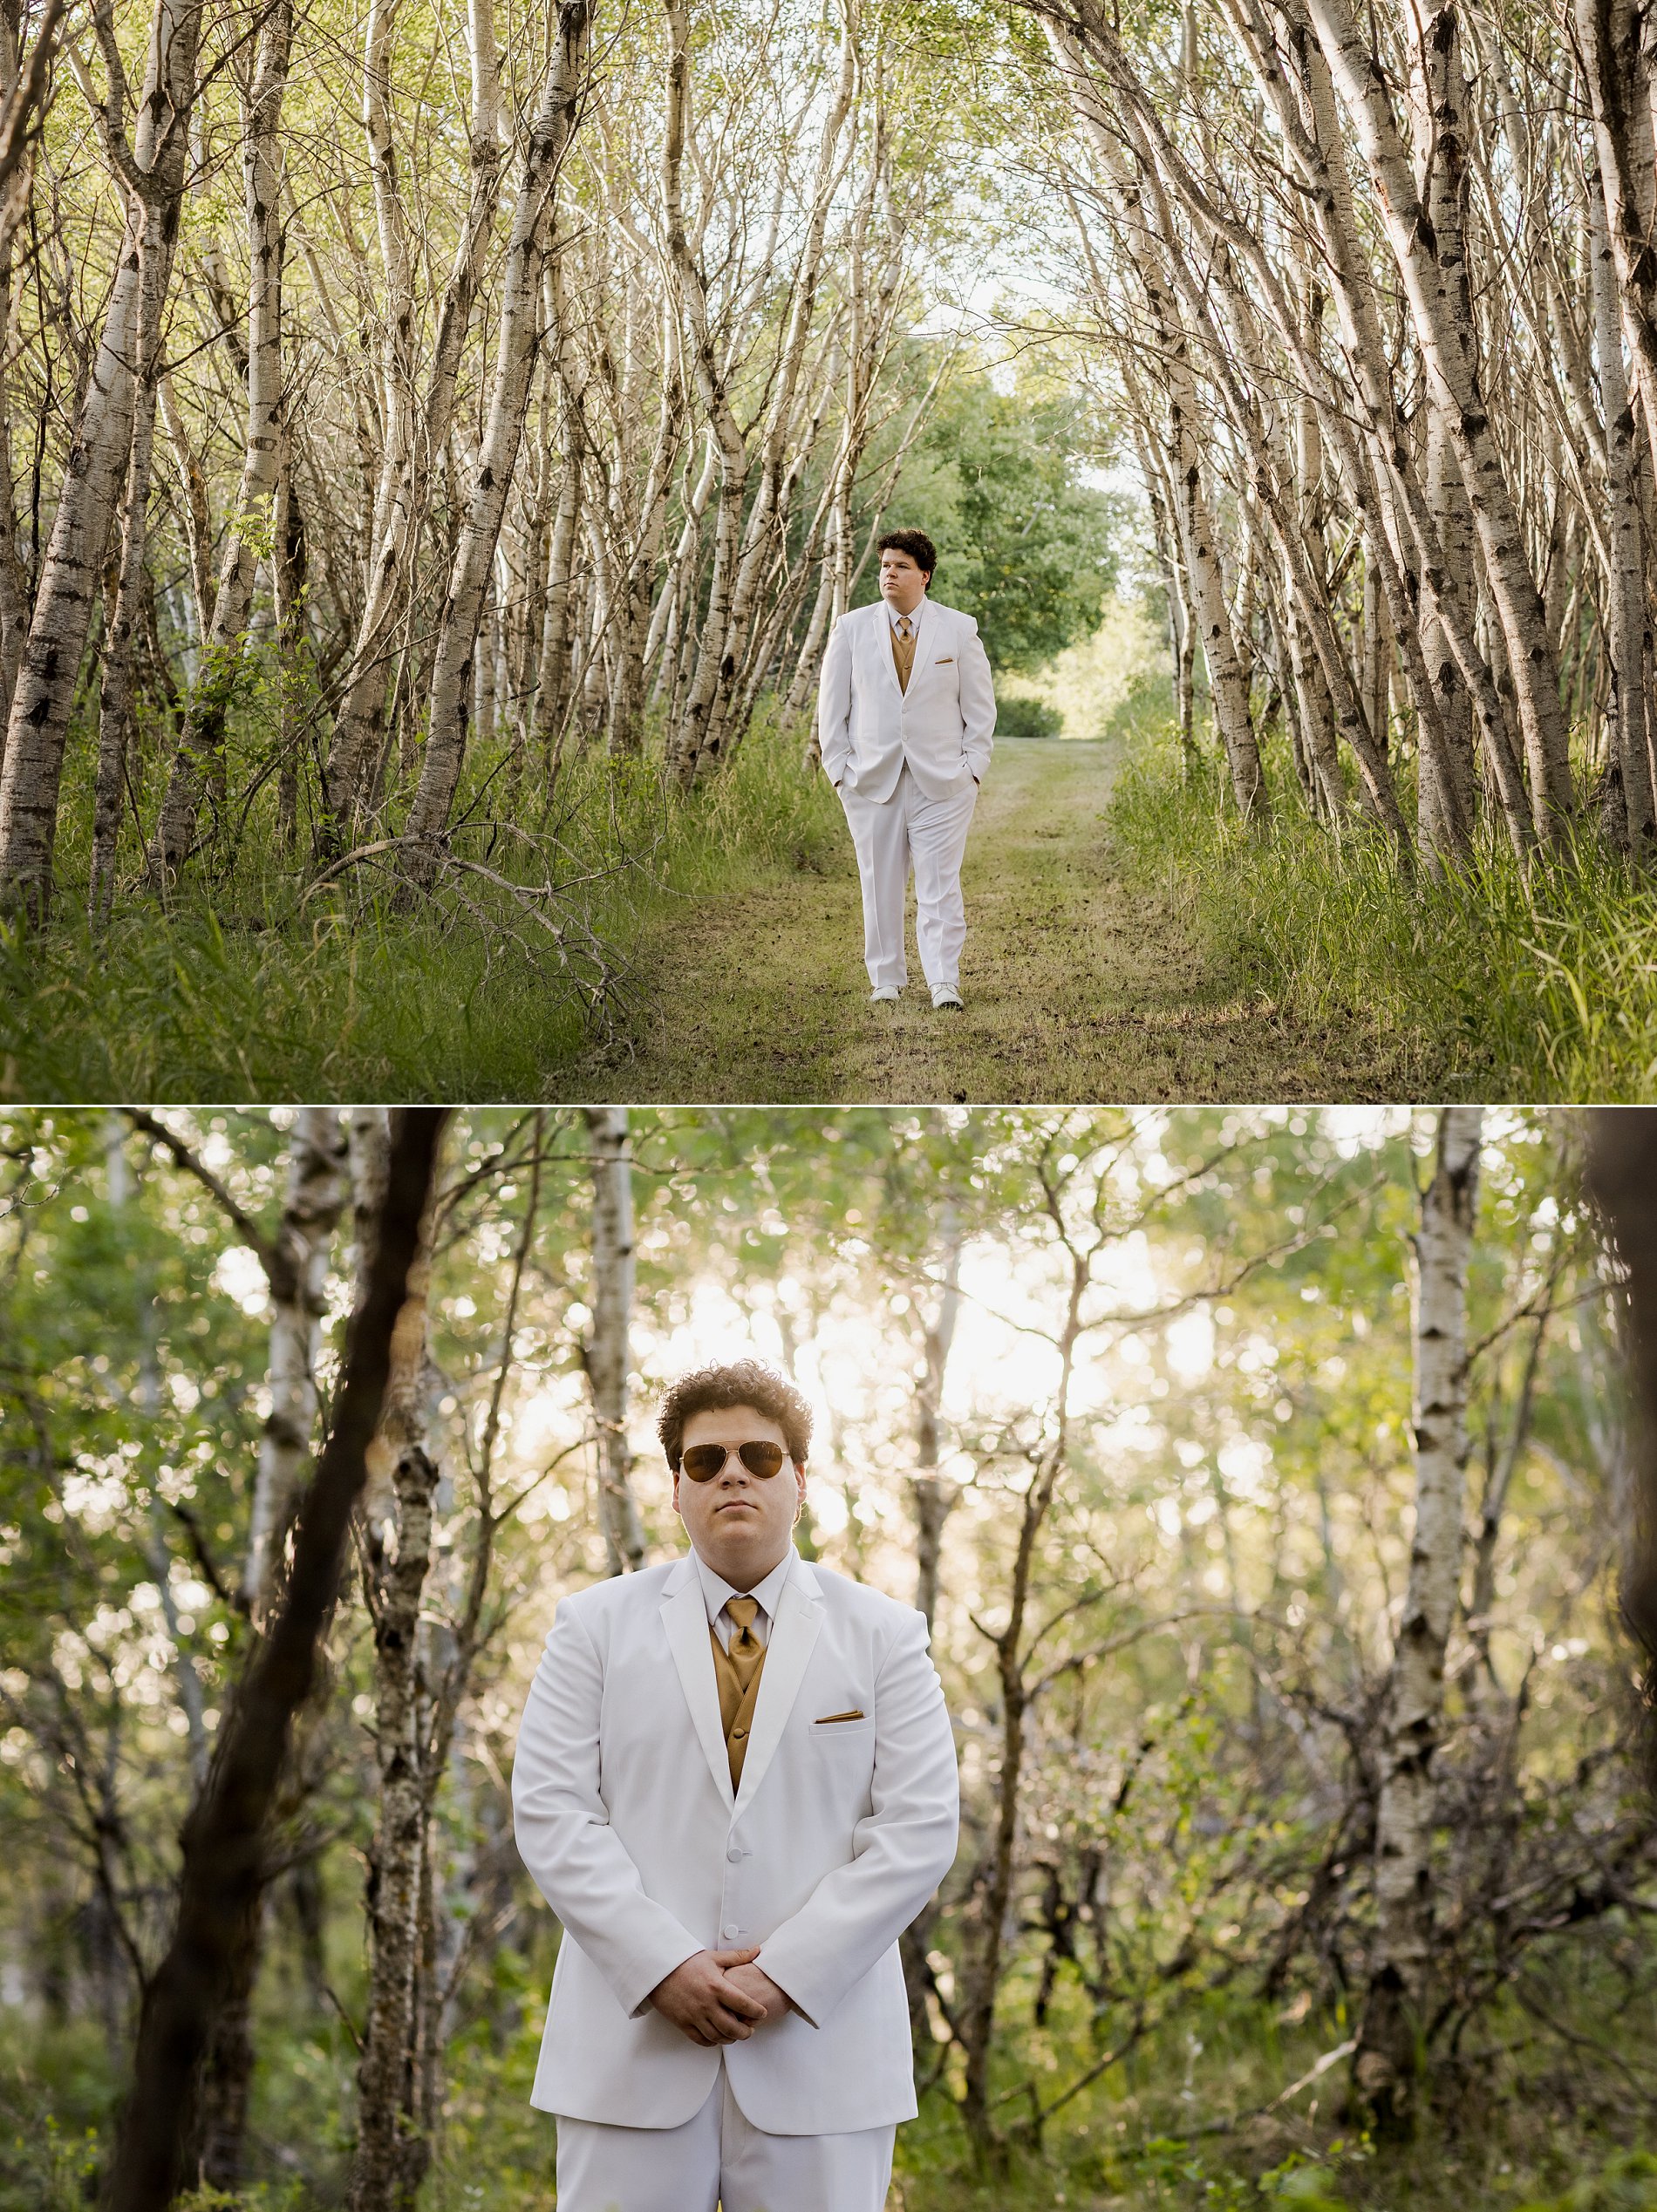 Male high school graduate in a white suit with gold accessories, standing on a path in the trees near Delisle, Saskatchewan.